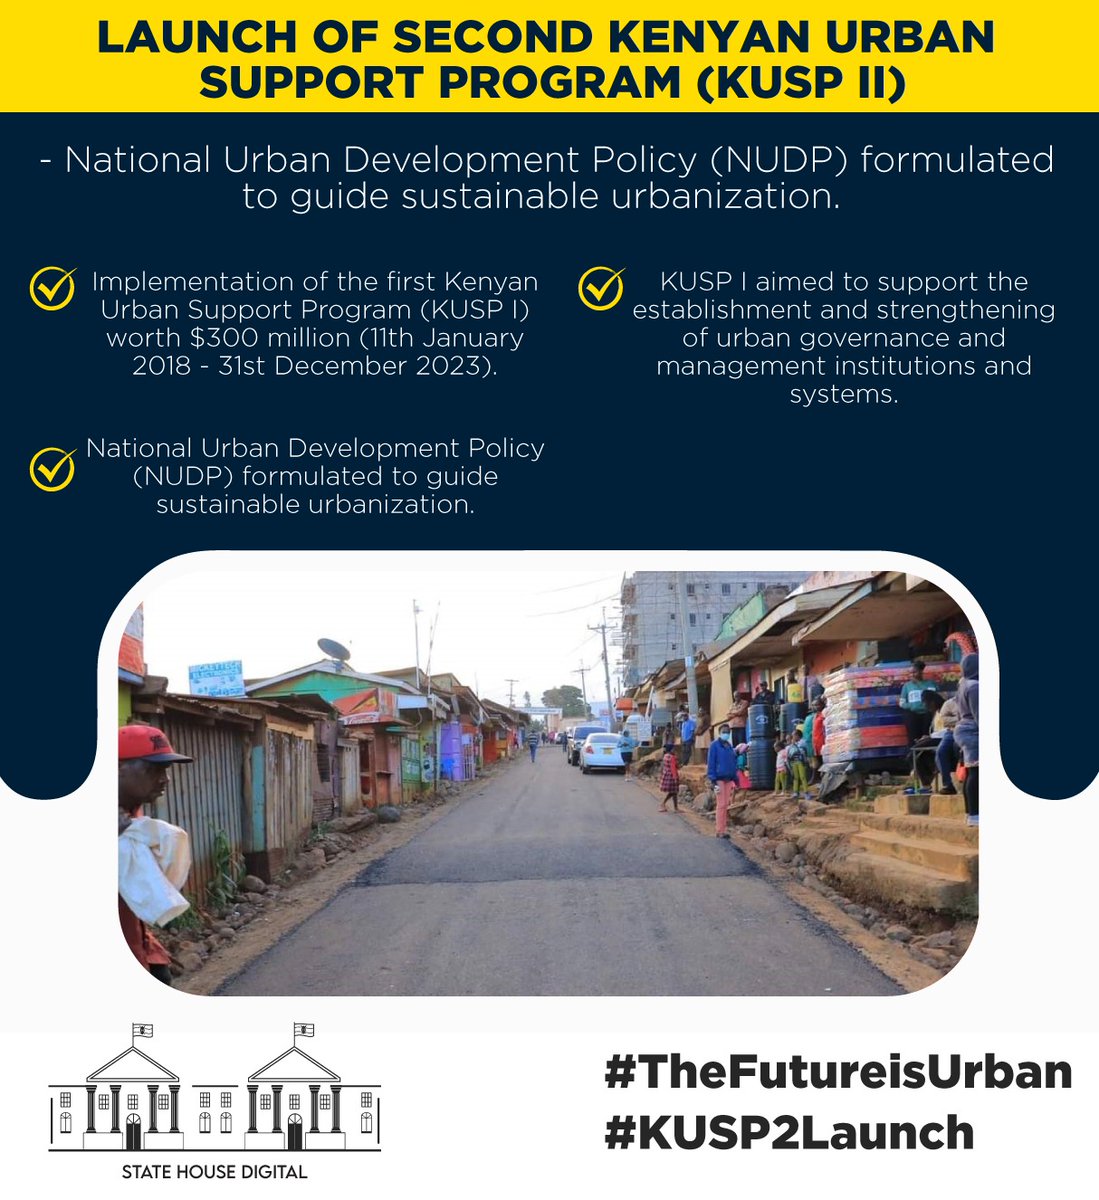 This targeted approach aim to address the lack of dedicated institutions for urban management, which poses significant challenges to effective urban development. @HousingUrbanKE Future Is Urban #KUSP2Launch